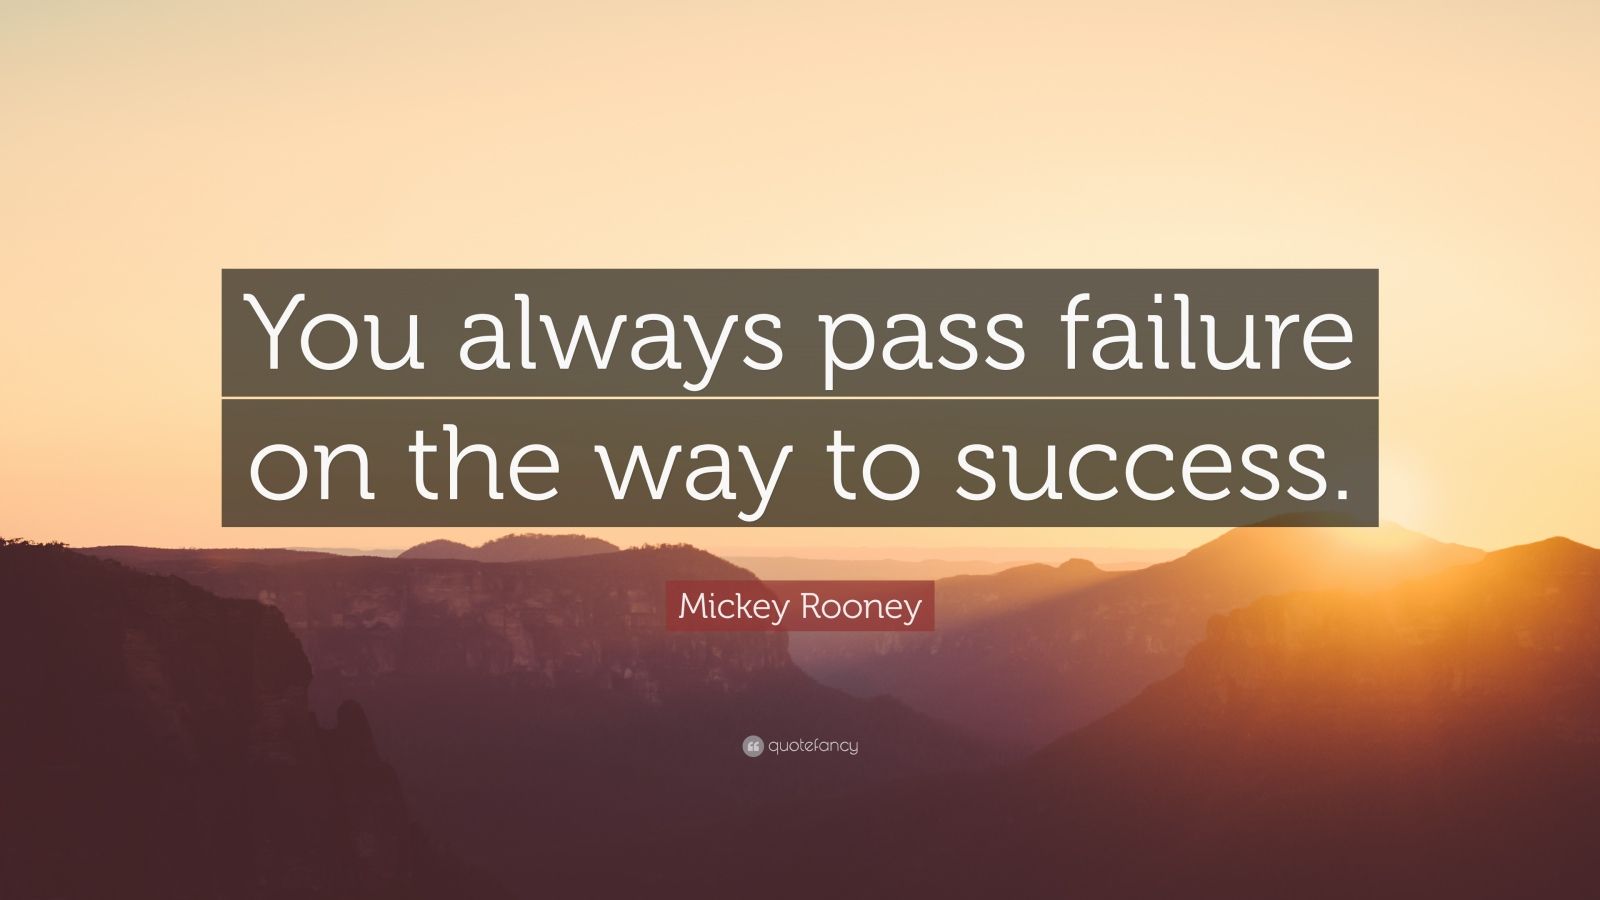 Mickey Rooney Quote: “You always pass failure on the way to success